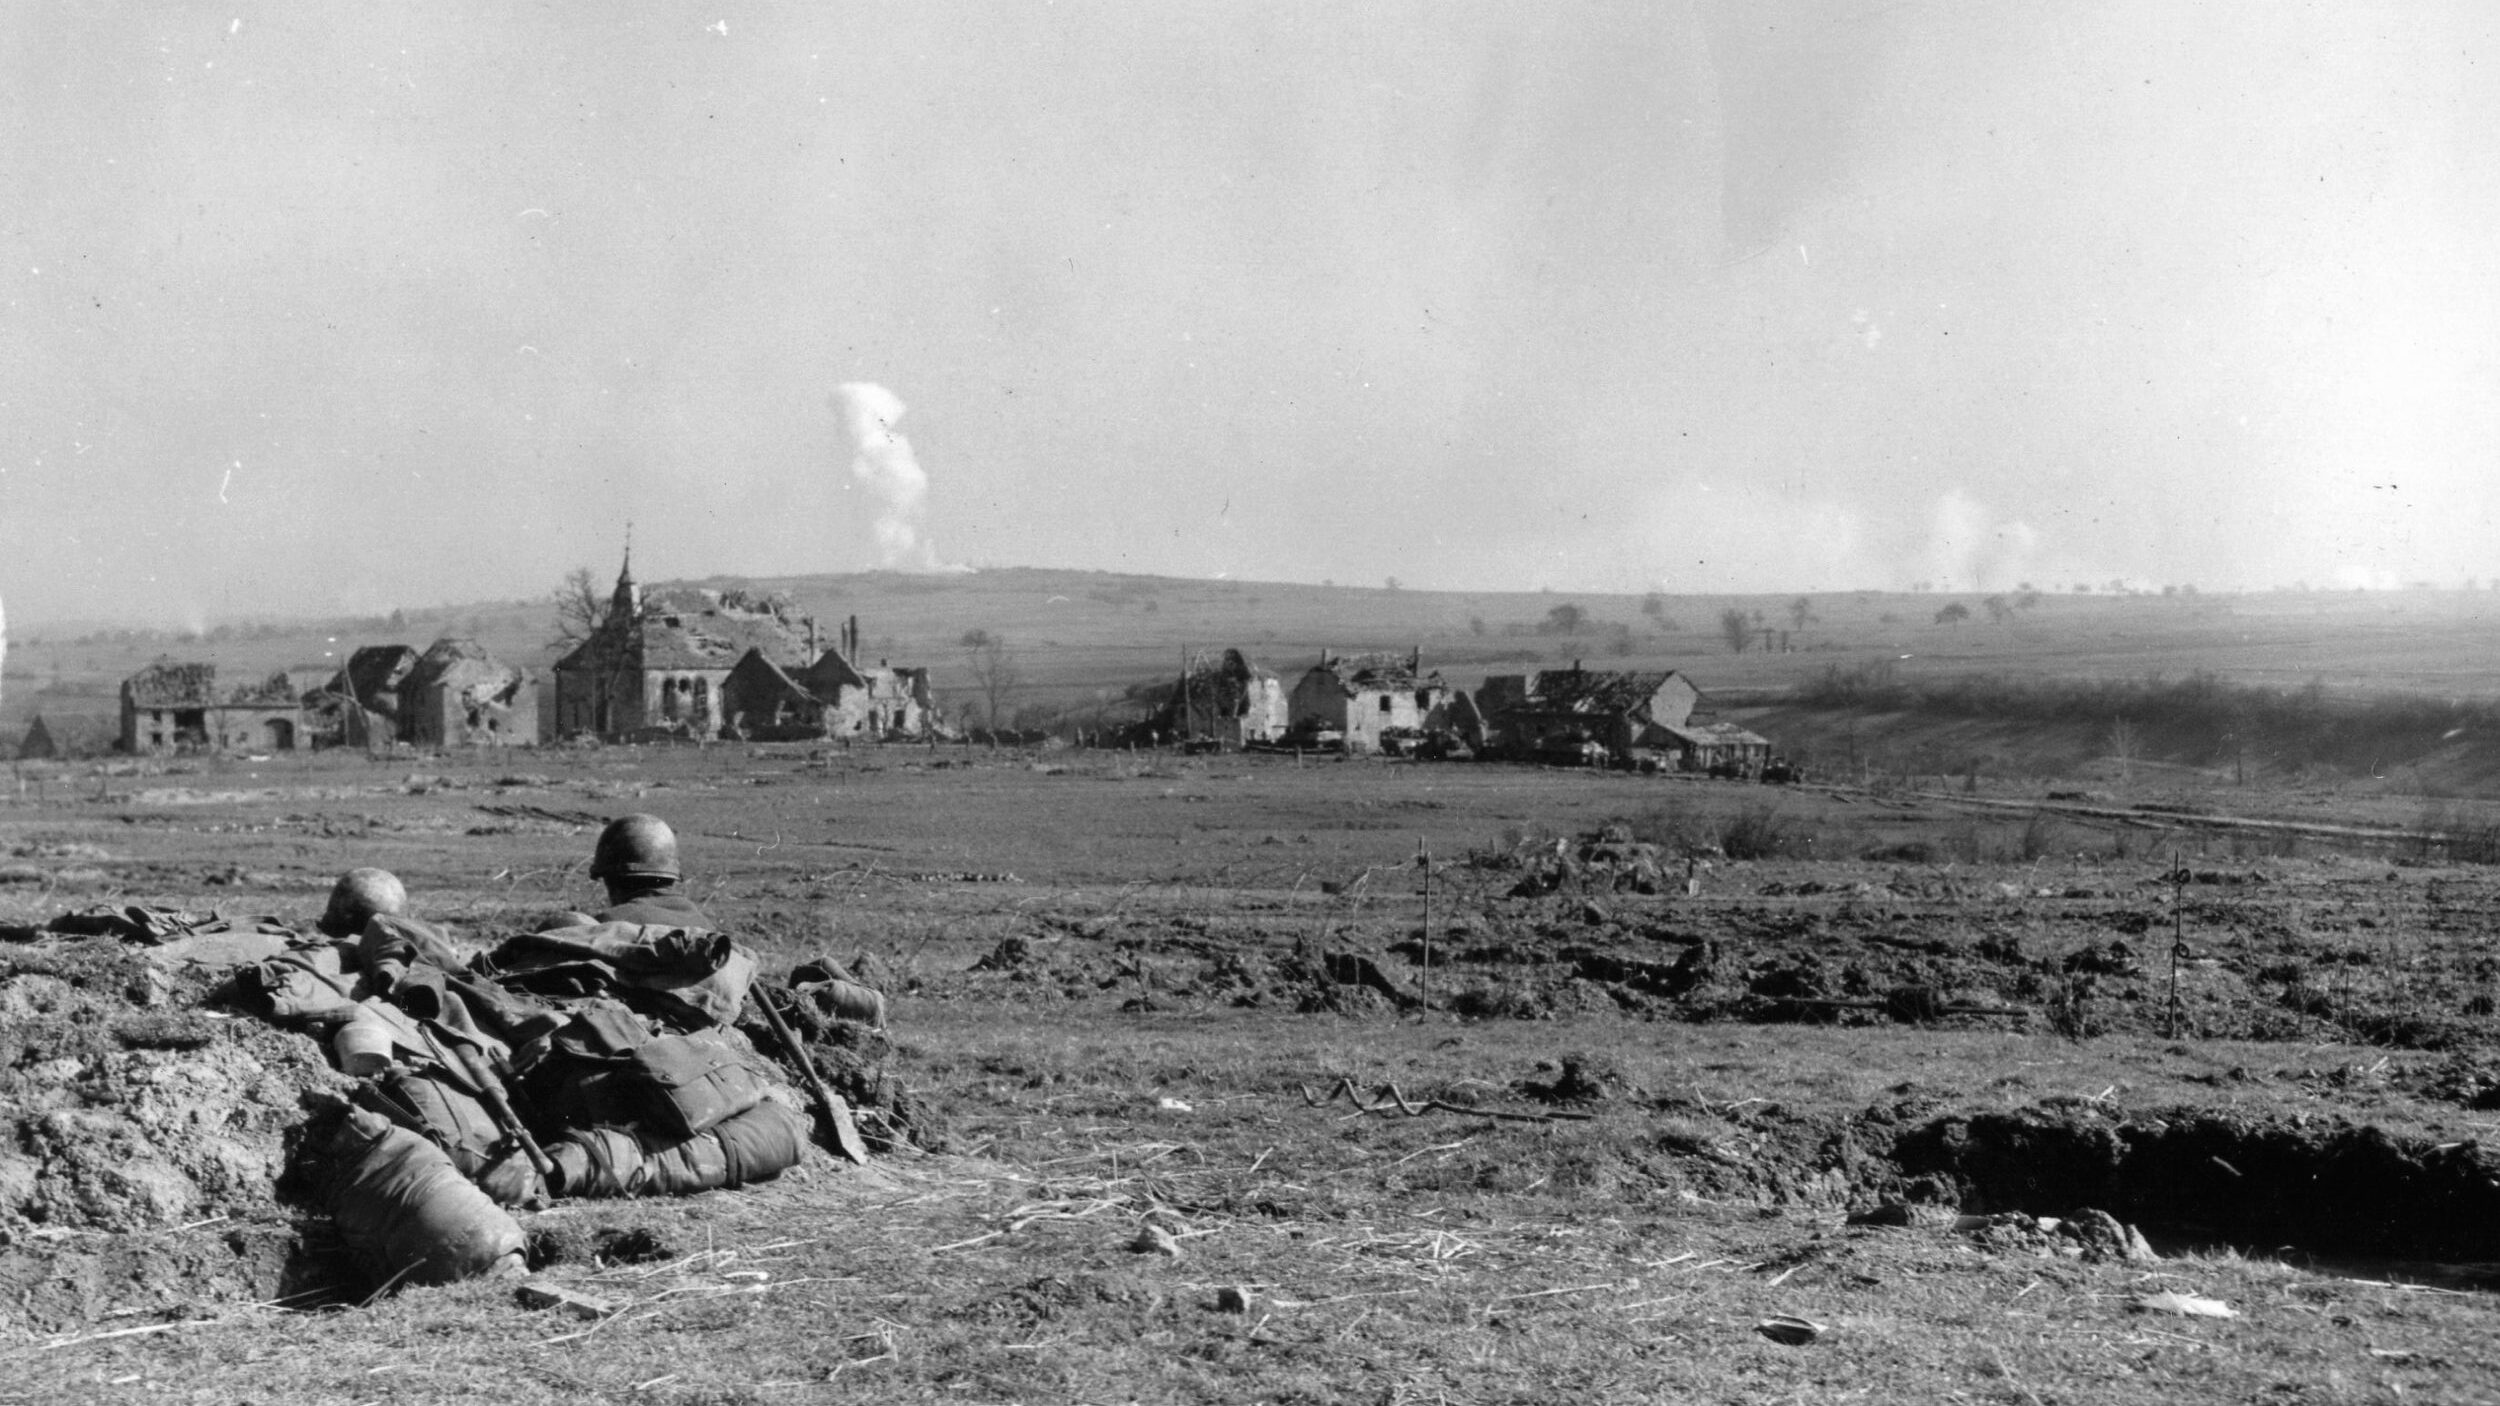 A safe distance away, two soldiers of the U.S. 44th Division observe the shelling and aerial bombardment of German positions near the village of Enchenberg. German tanks harassed American infantry throughout their fight for the town.